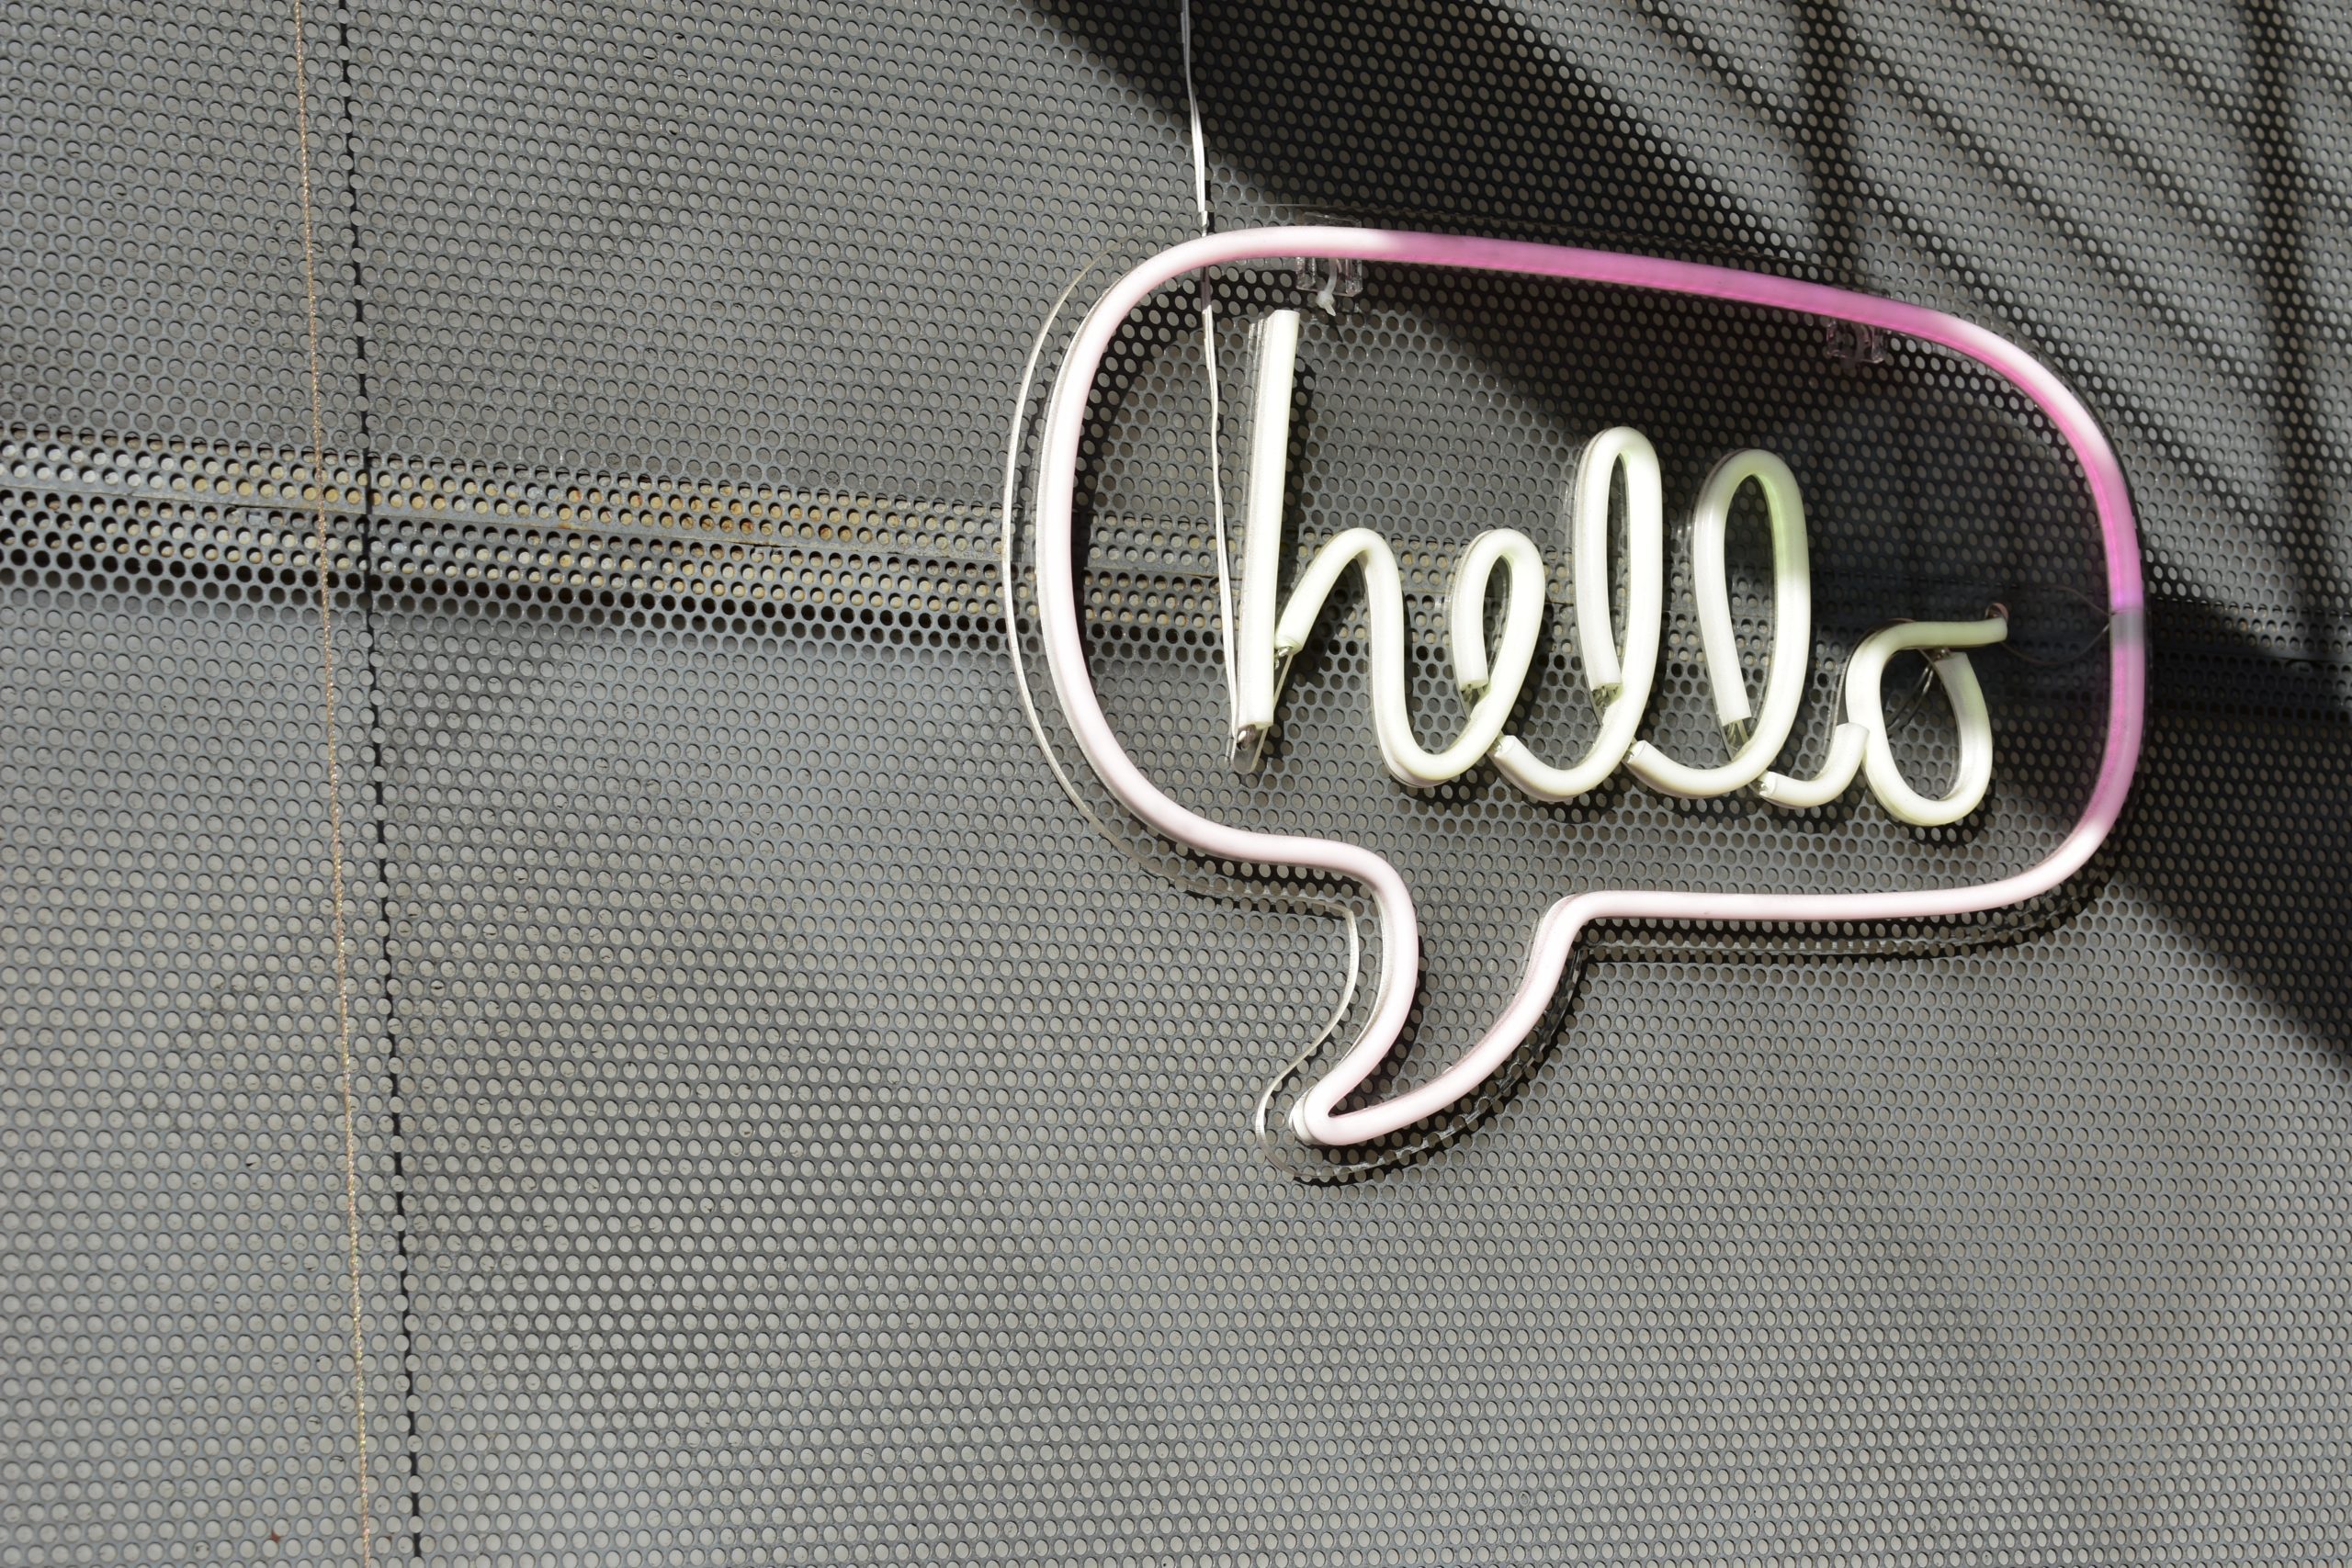 neon sign that says 'hello' in a speech bubble